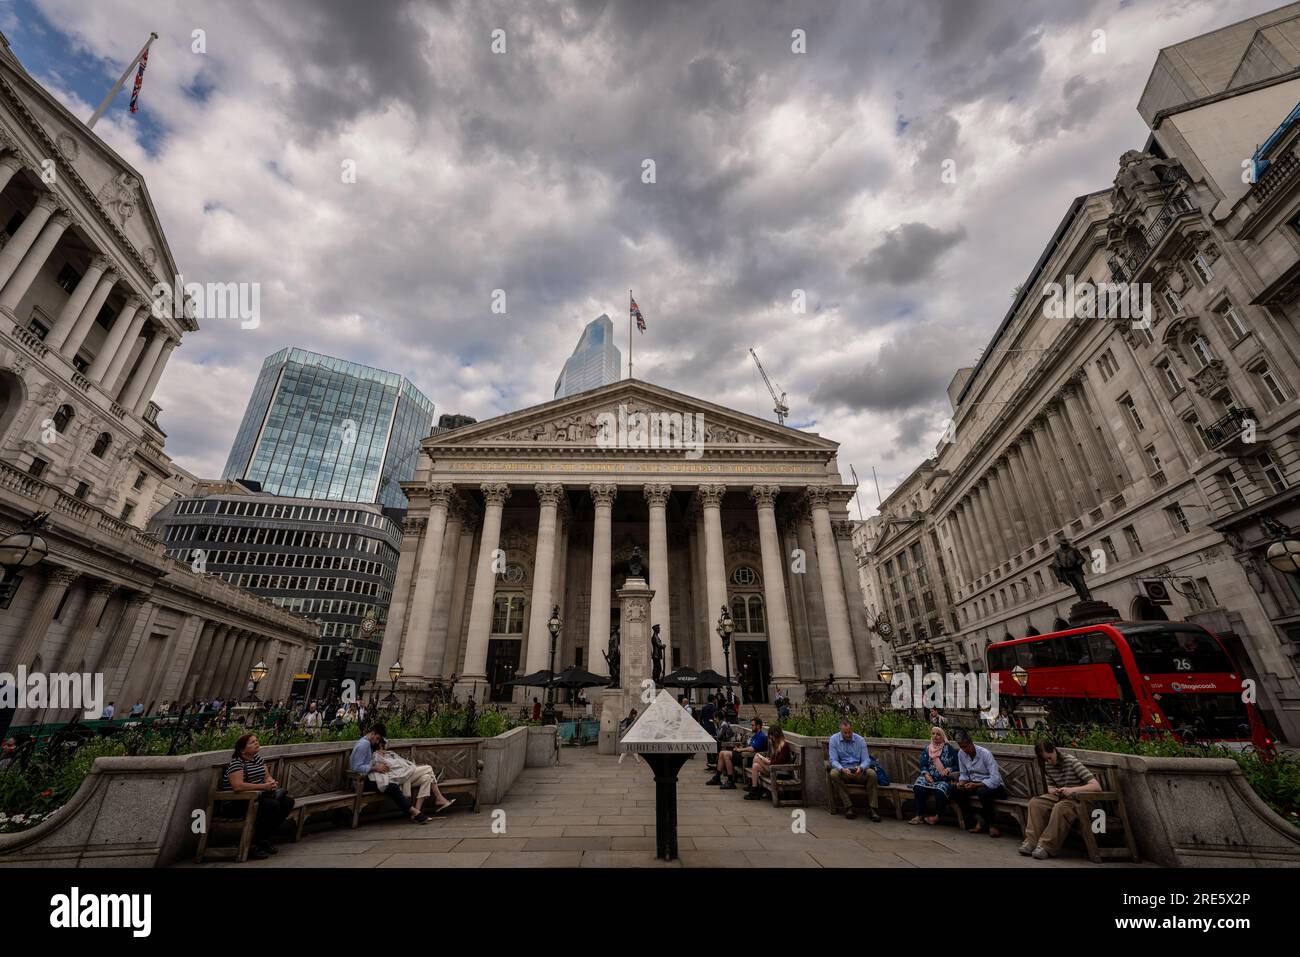 The Royal Exchange - City of London